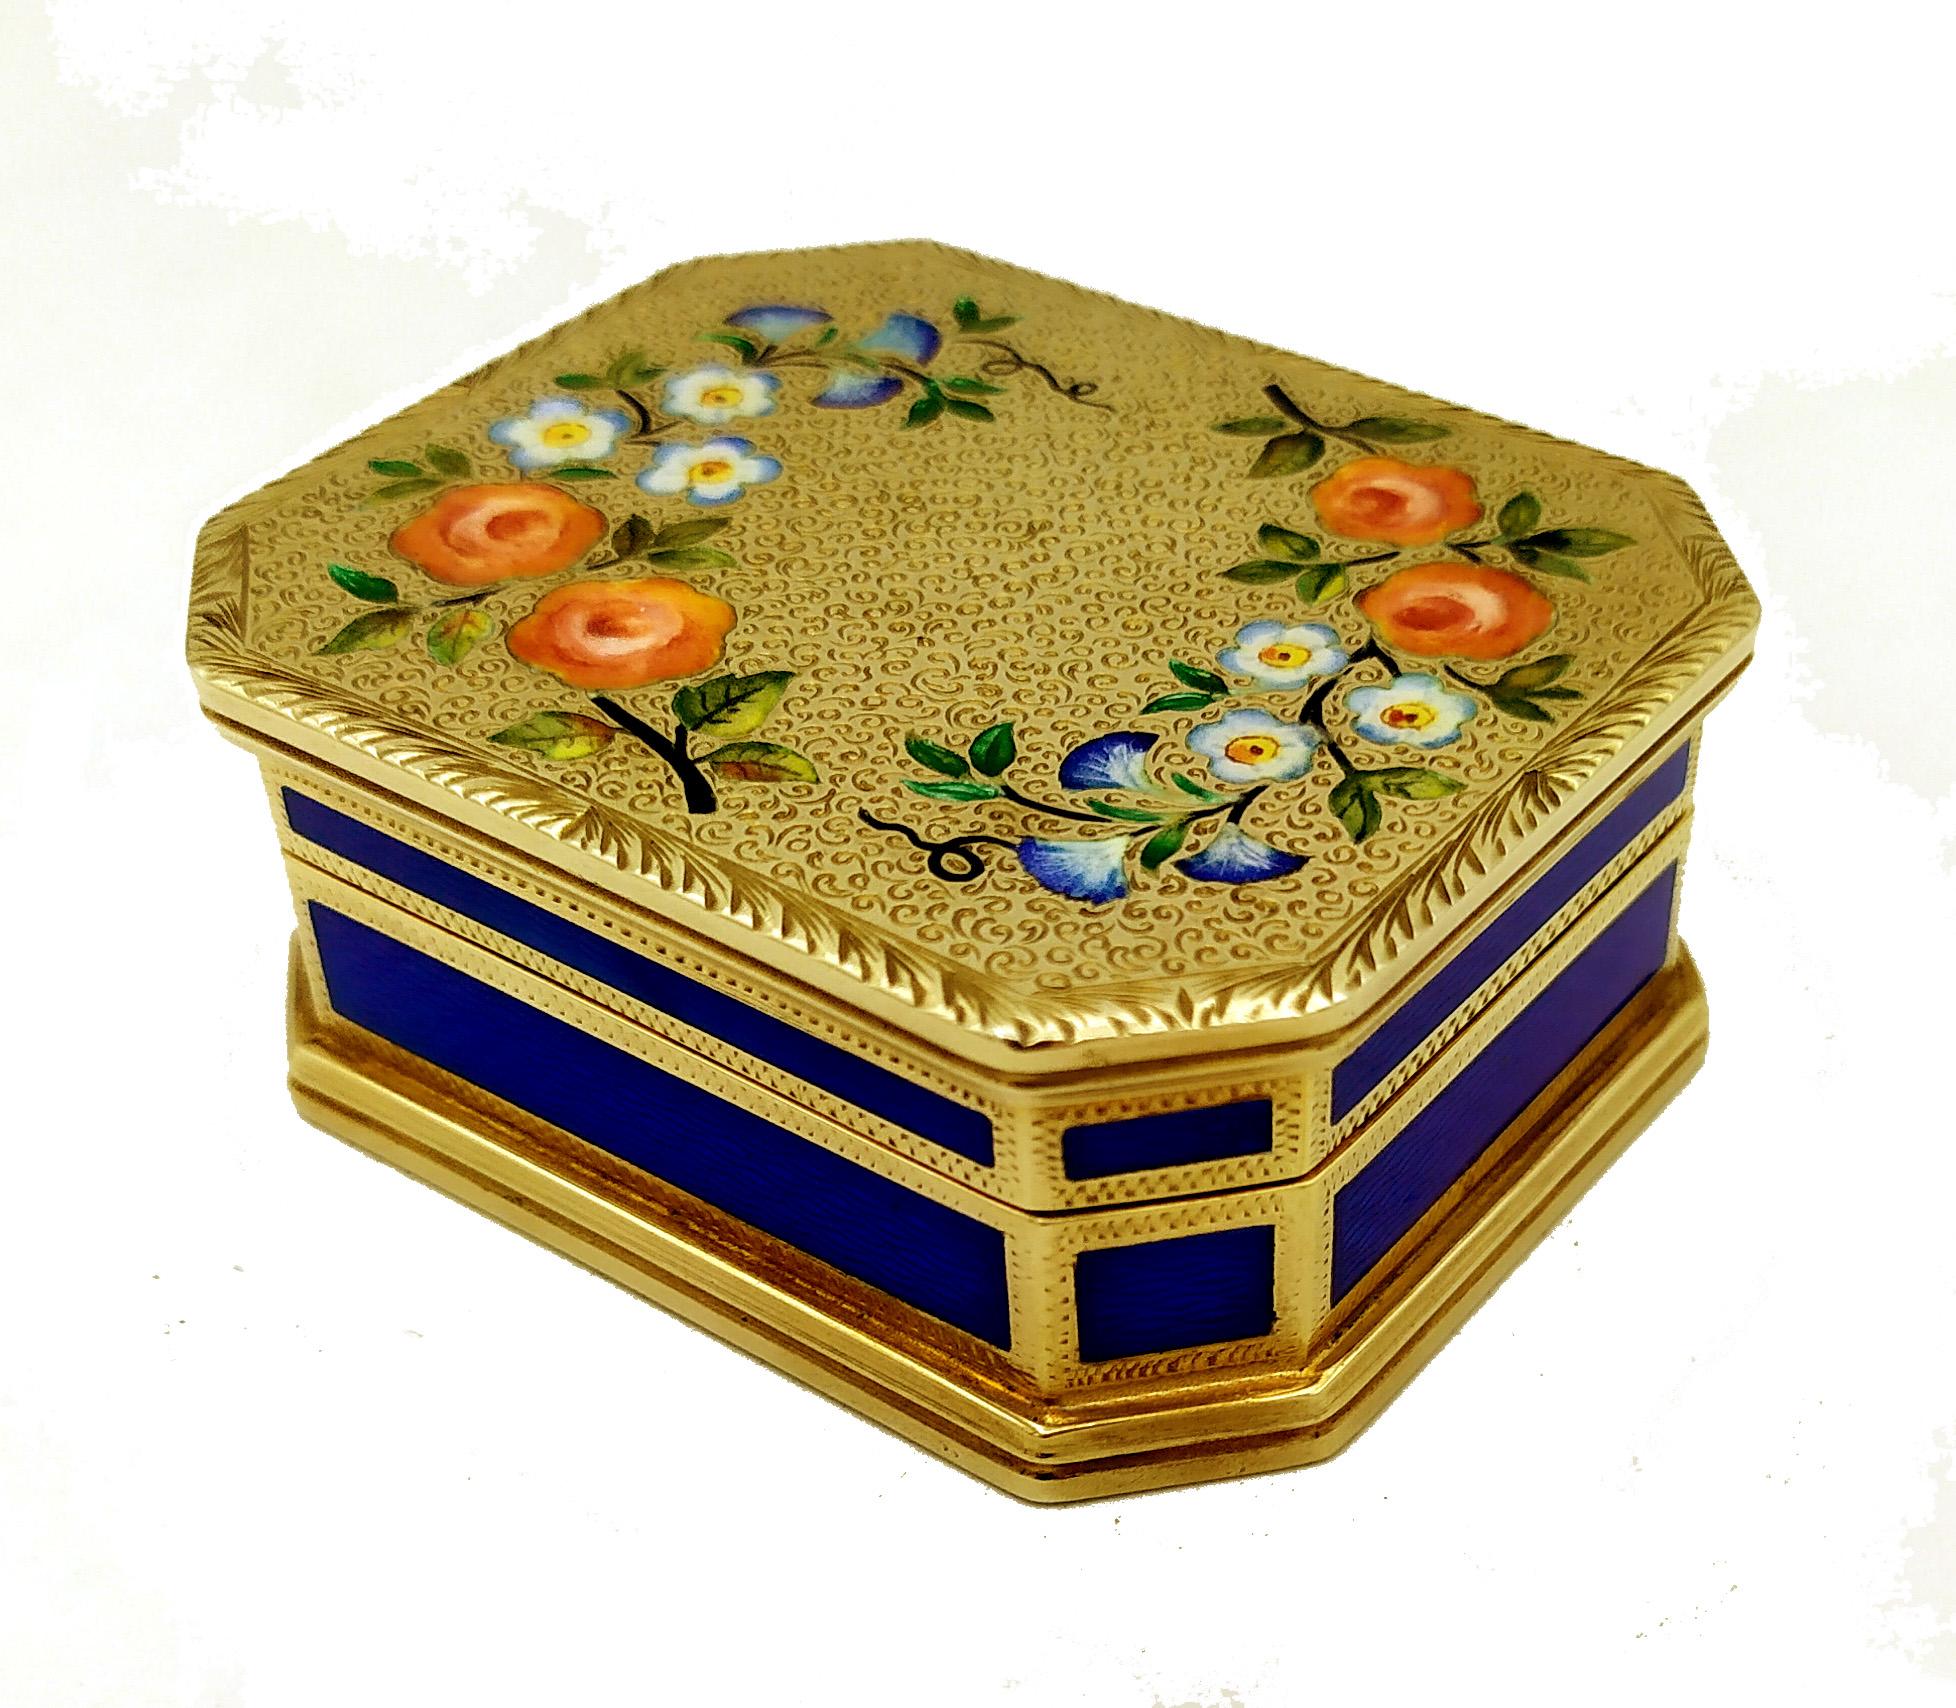 Octagonal snuff box in sterling silver 925/1000 gold plated with borders in the English Queen Anne style and sides with translucent fired enamels on guillochè. On the lid, very fine floral engraving, fire-enamelled and hand-painted by the painter